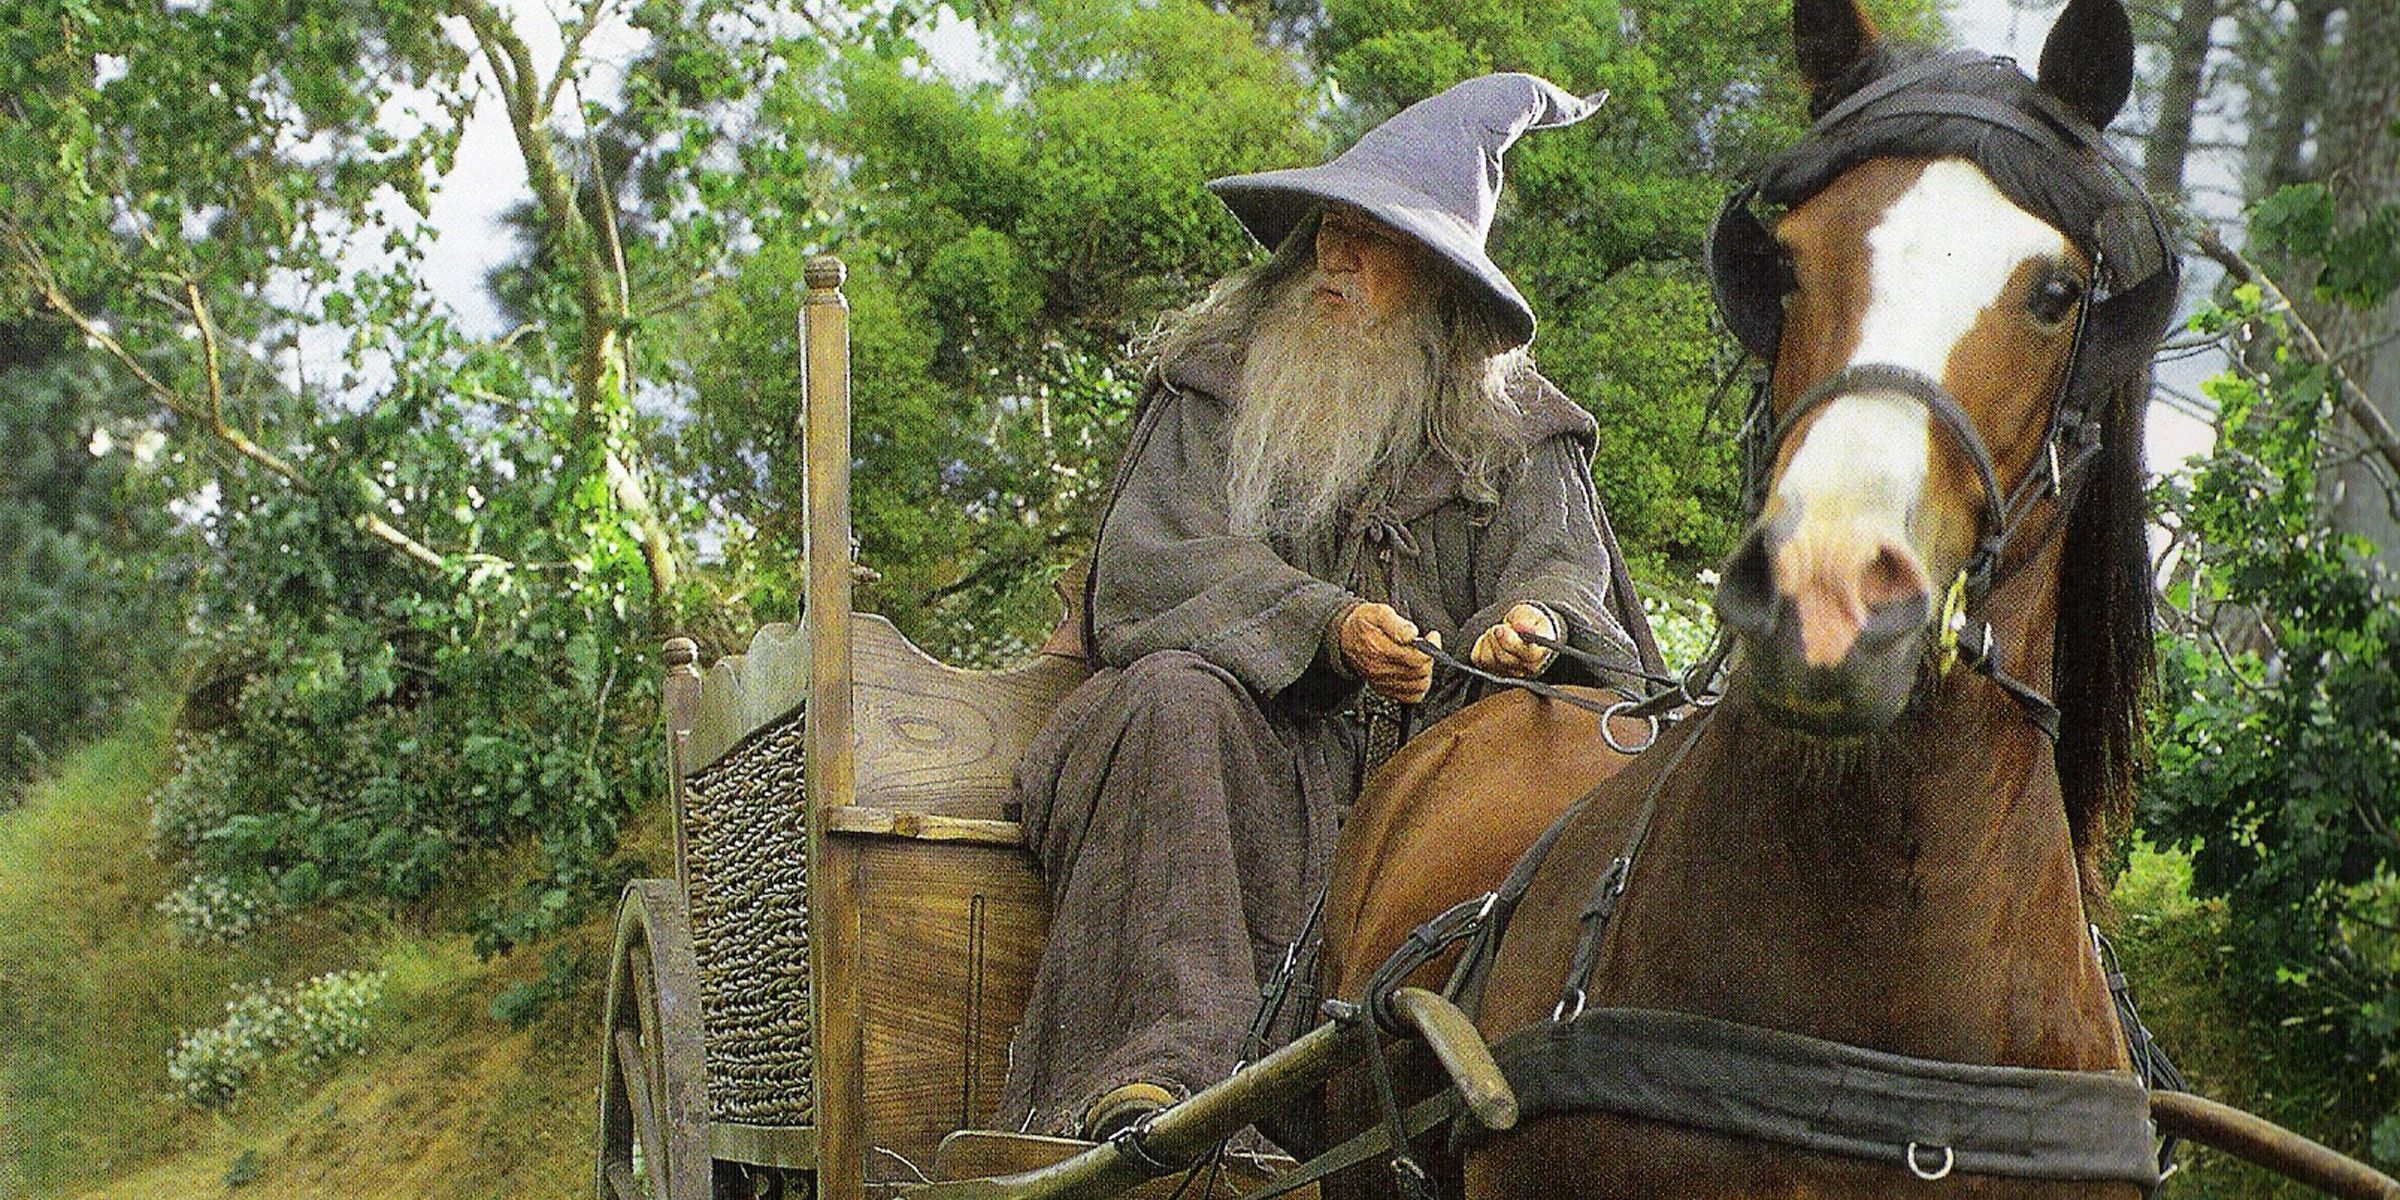 Gandalf arrives in The Shire